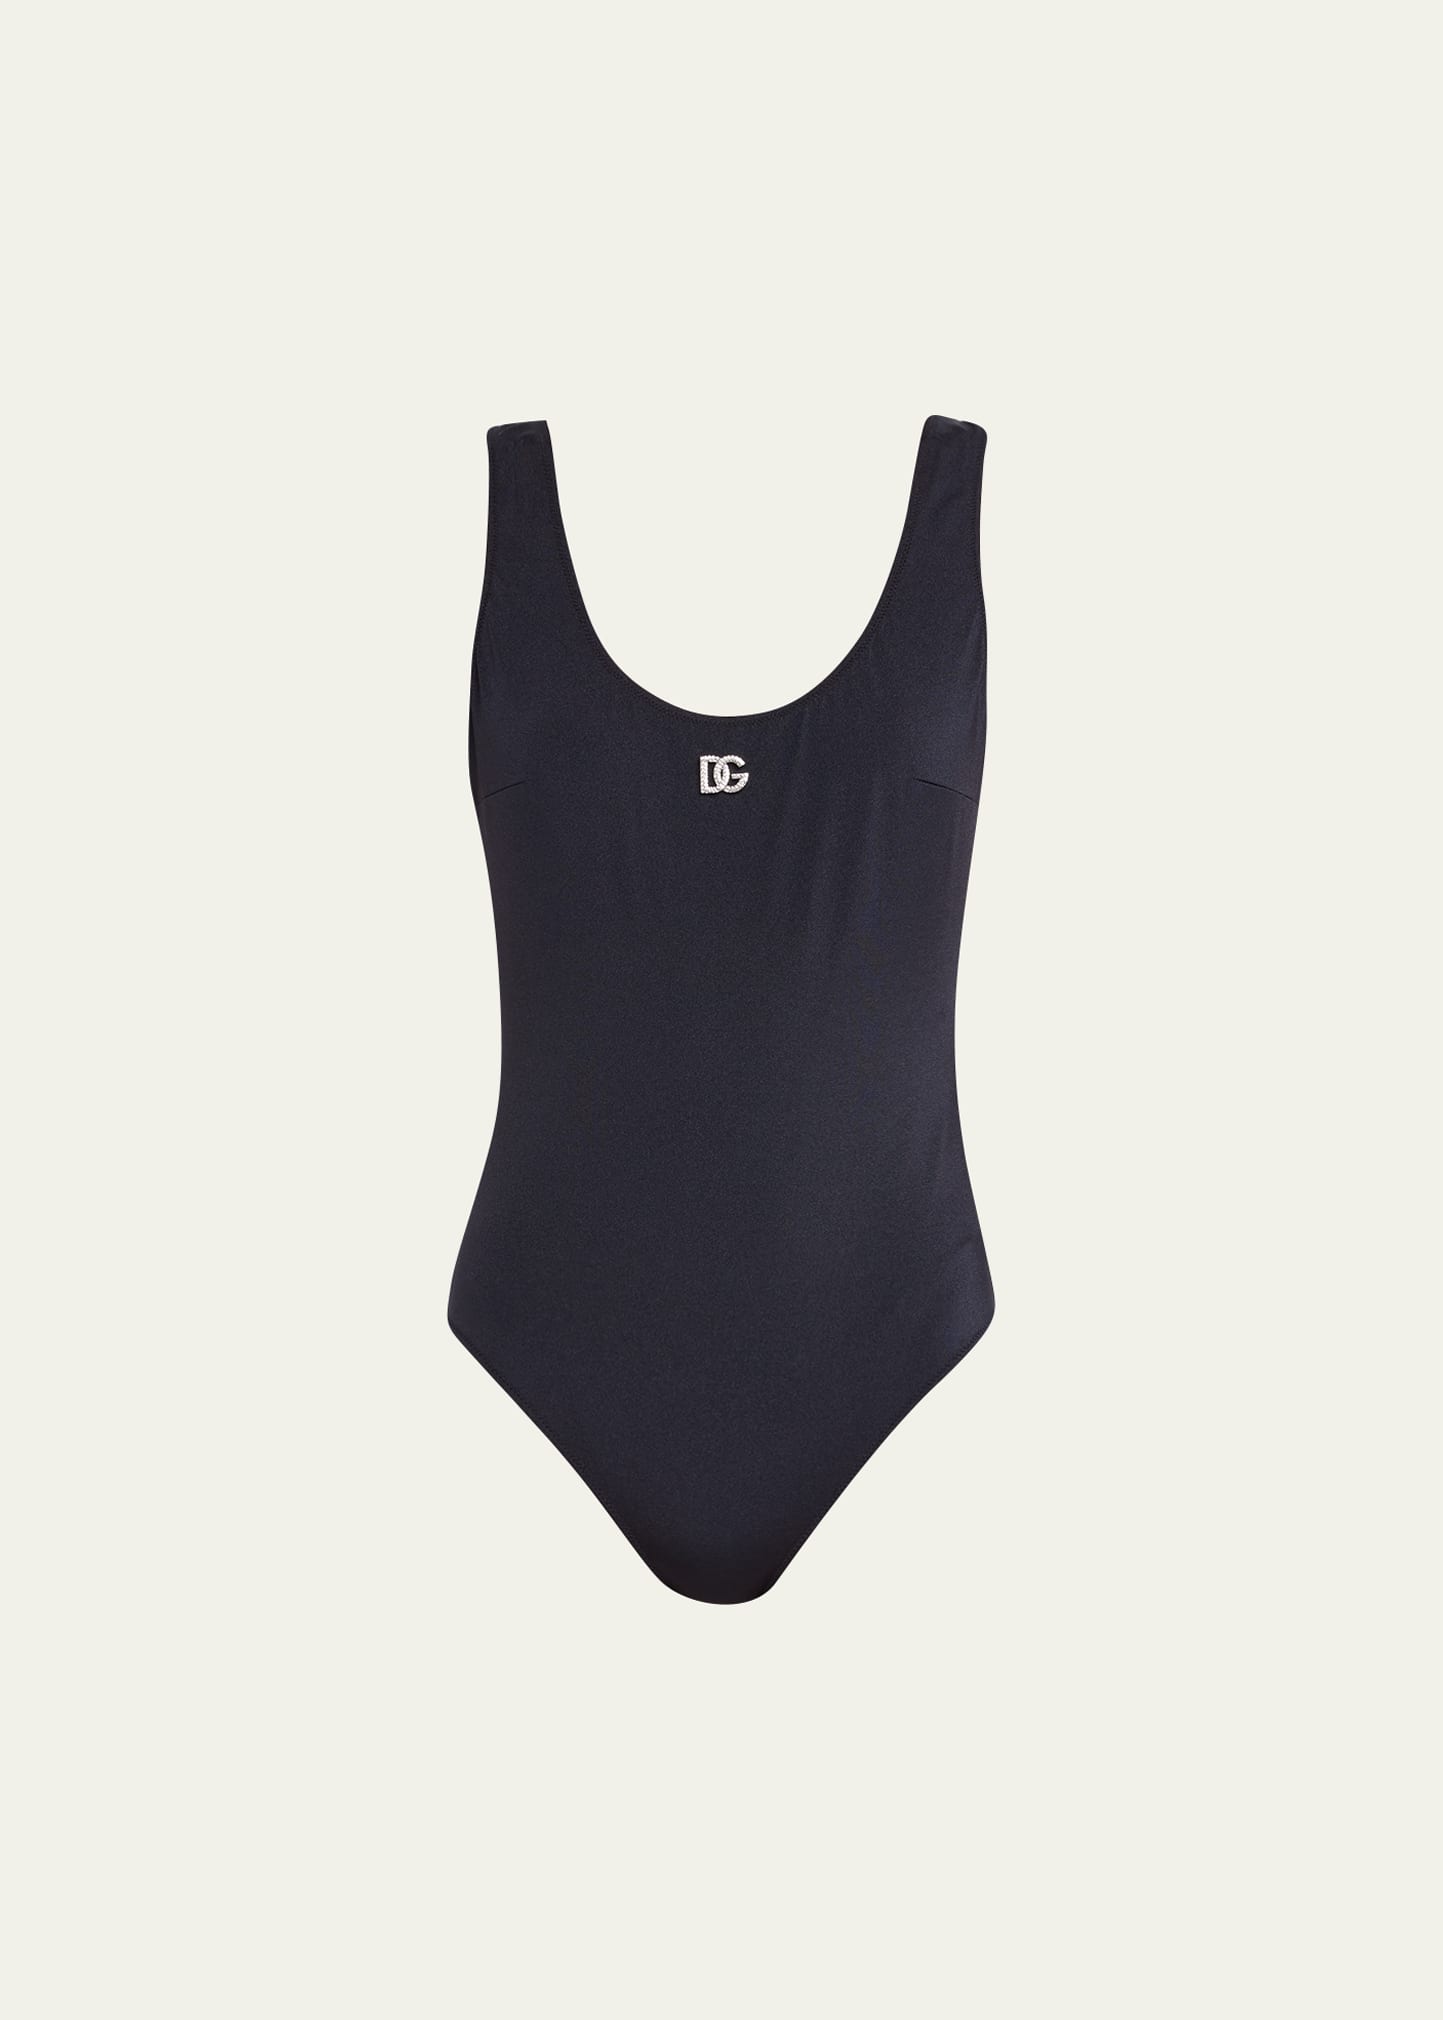 DOLCE & GABBANA SENSITIVE JERSEY OLYMPIC ONE-PIECE SWIMSUIT WITH CRYSTALS DG HARDWARE